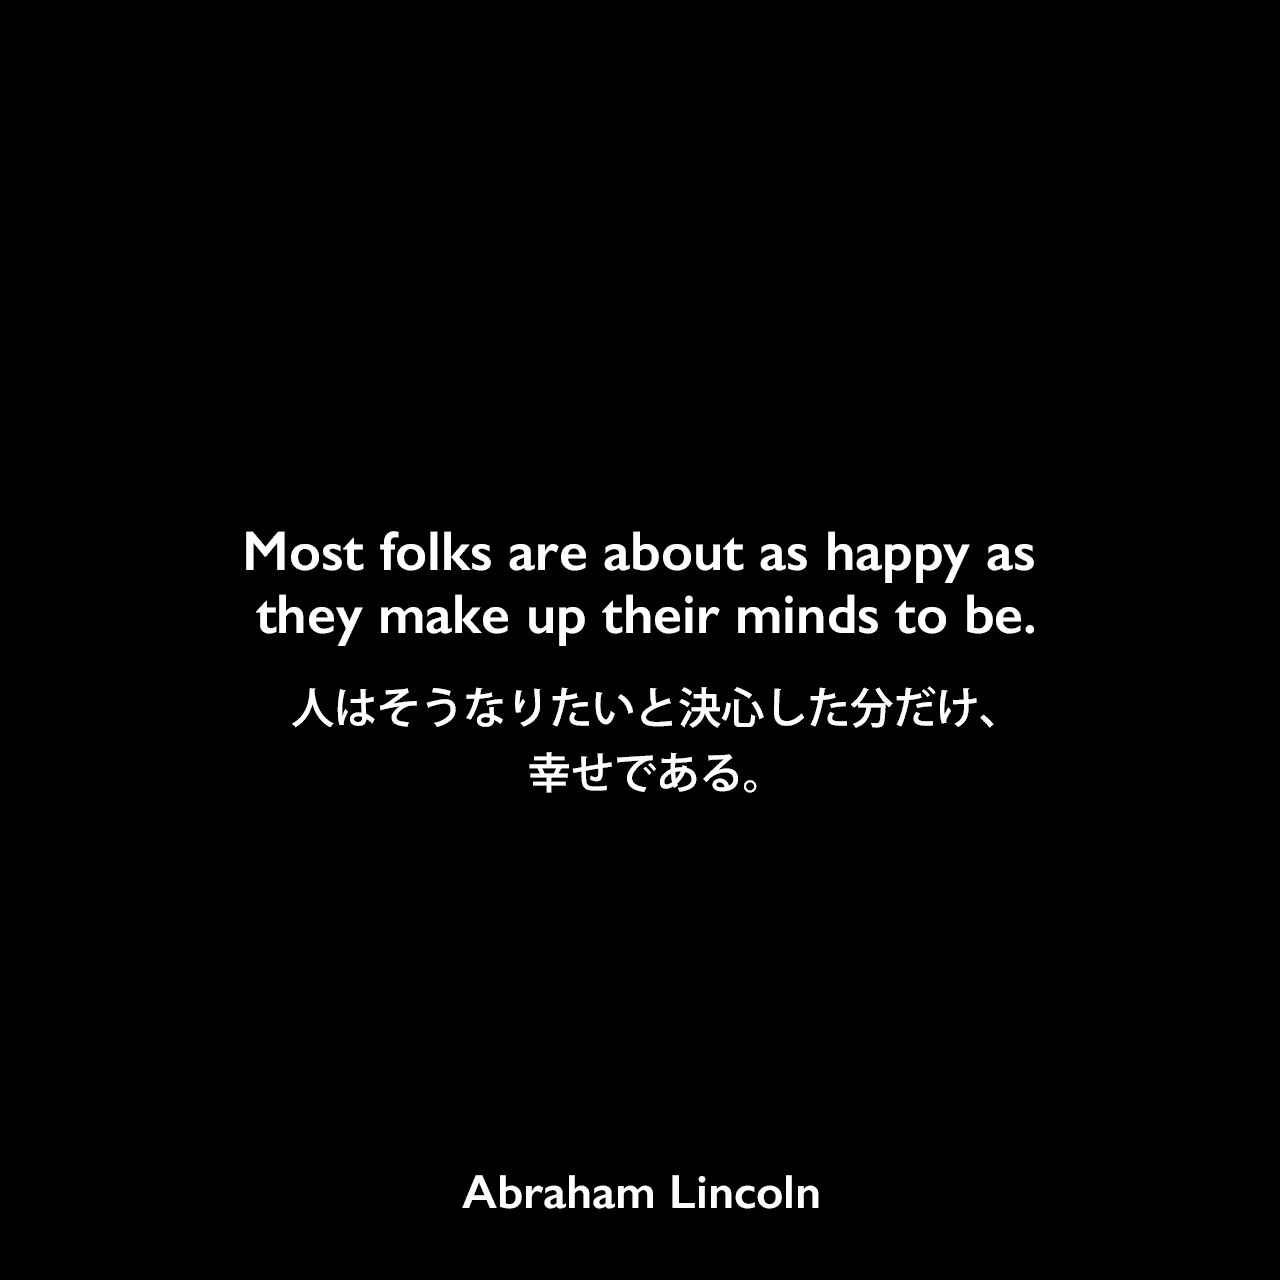 Most folks are about as happy as they make up their minds to be.人はそうなりたいと決心した分だけ、幸せである。